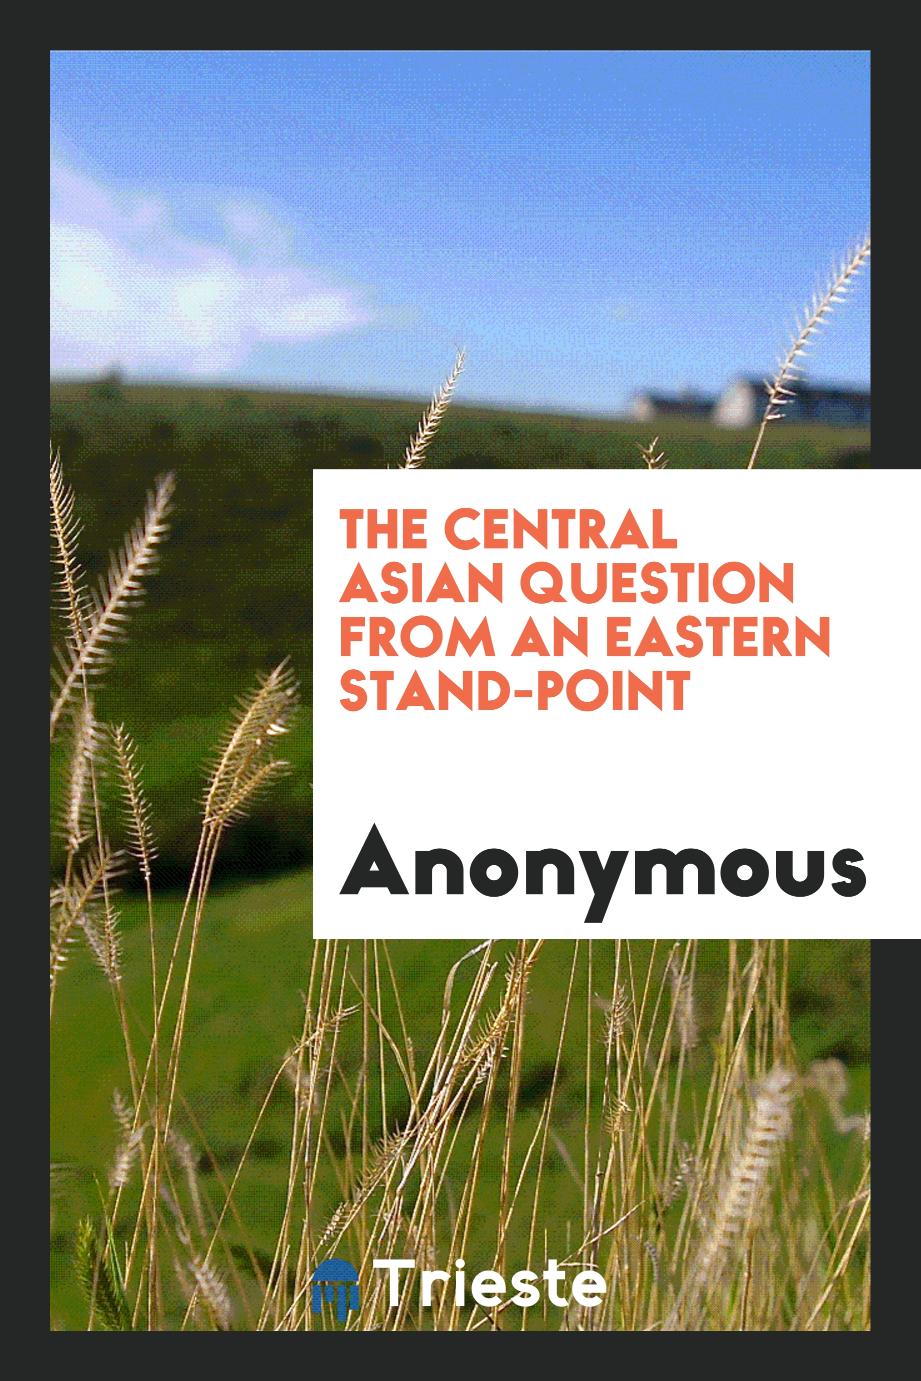 The Central Asian Question from an Eastern Stand-Point